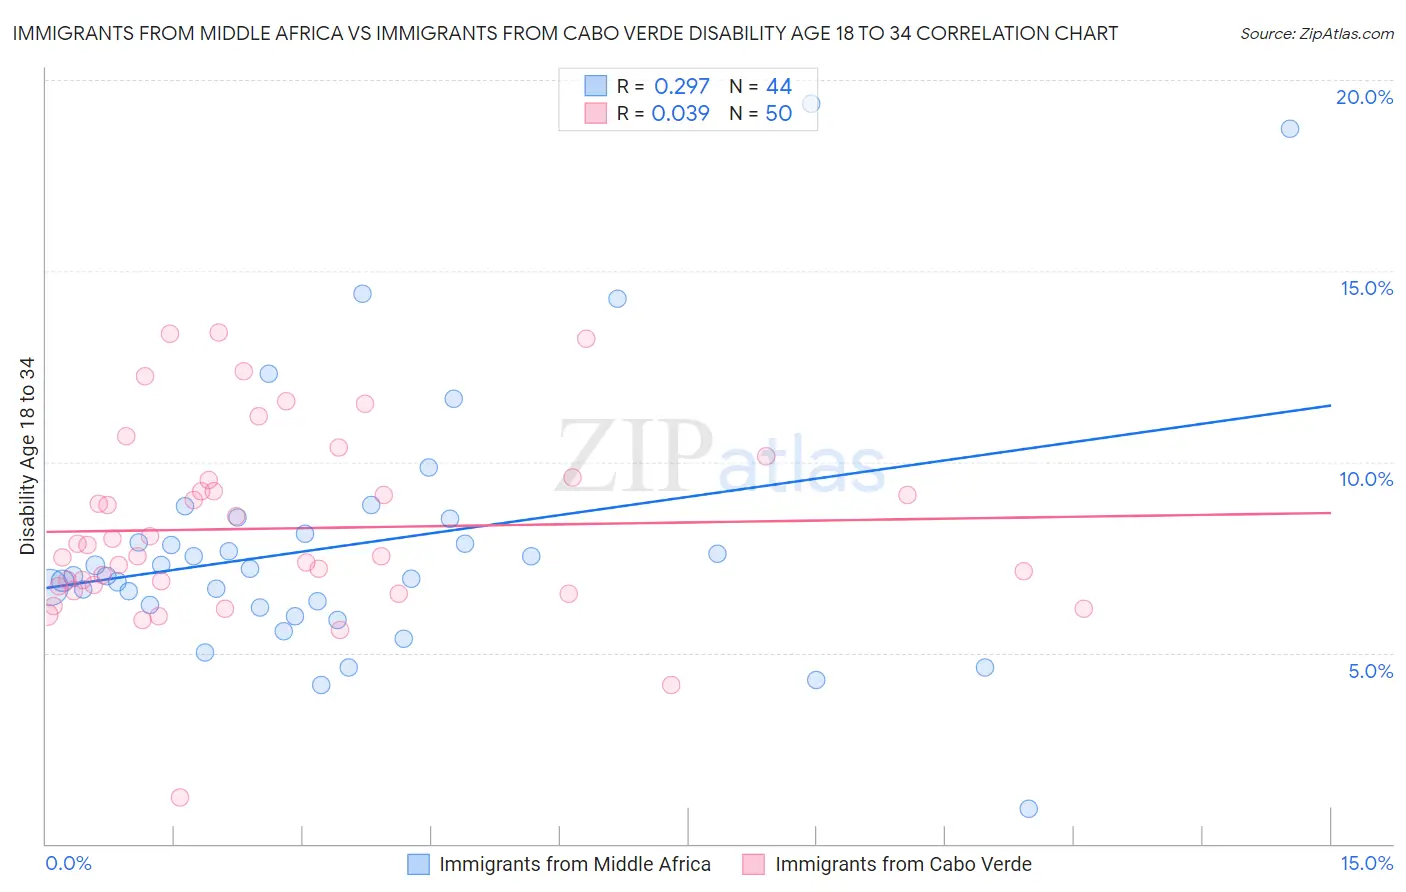 Immigrants from Middle Africa vs Immigrants from Cabo Verde Disability Age 18 to 34